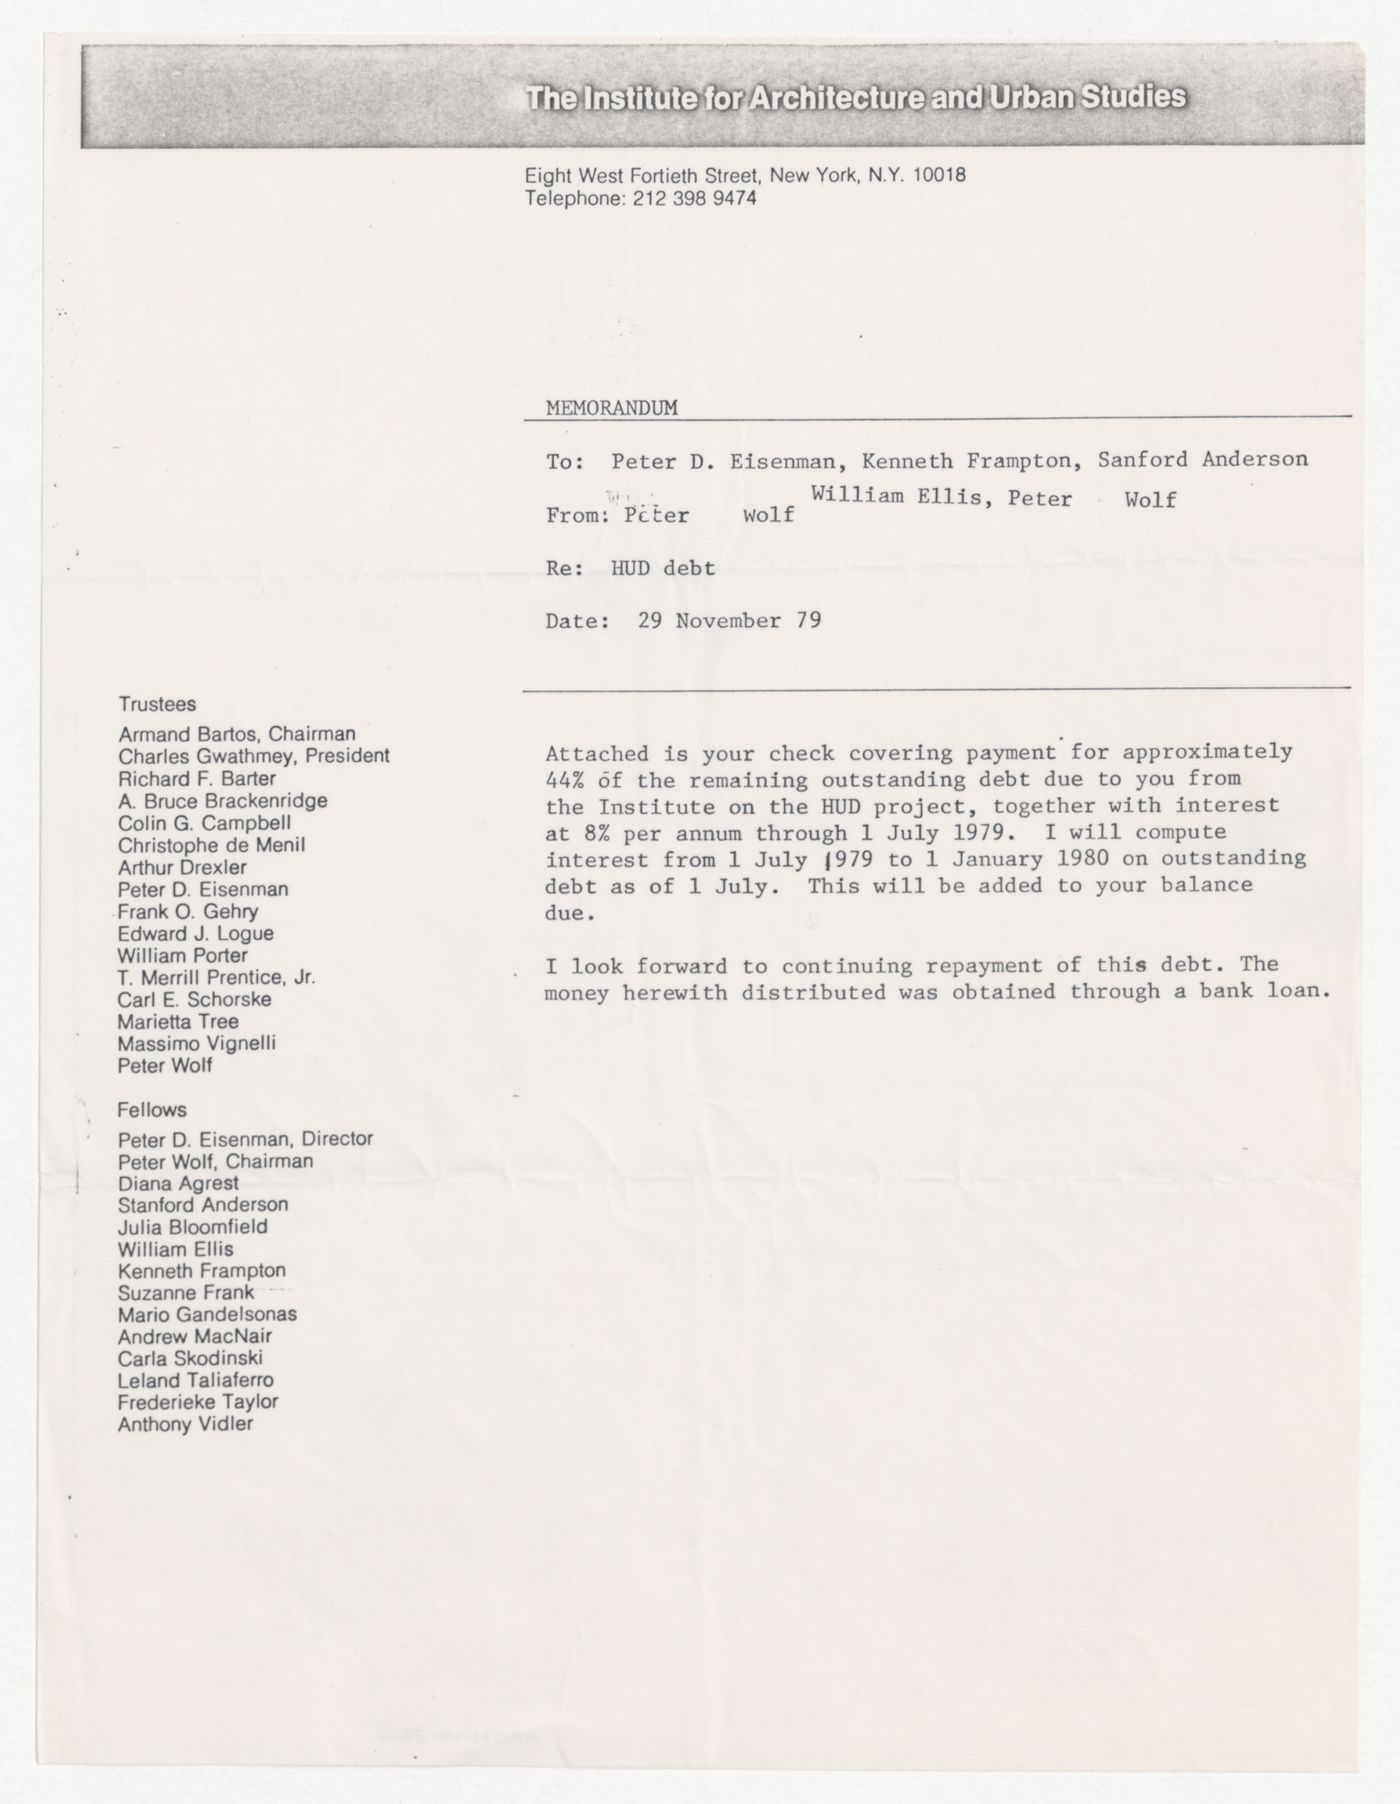 Memorandum from Peter Wolf to the Fellows about Department of Housing and Urban Development (HUD) dept repayment